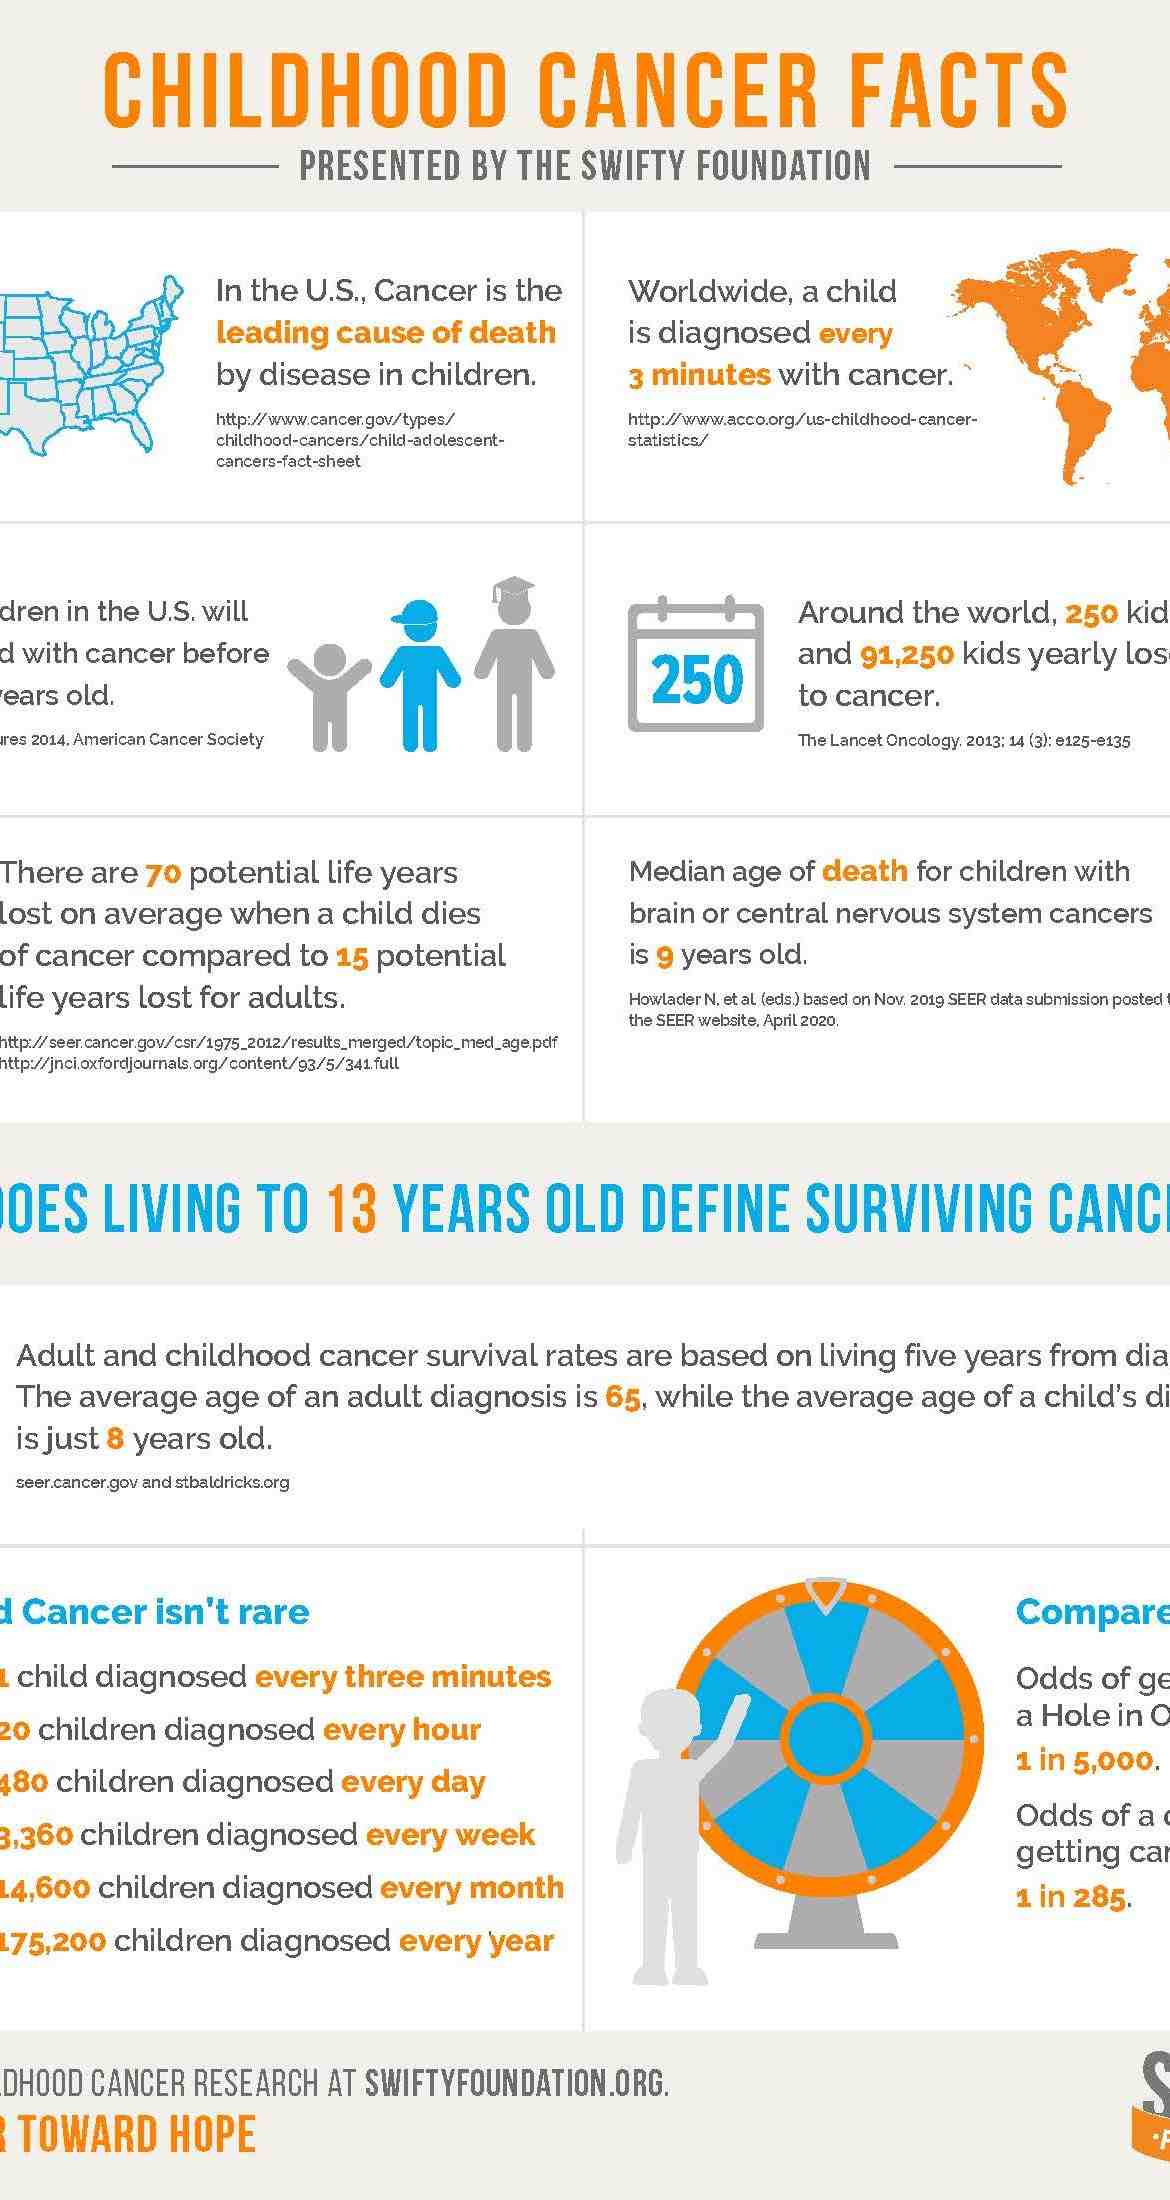 What causes pediatric cancer?